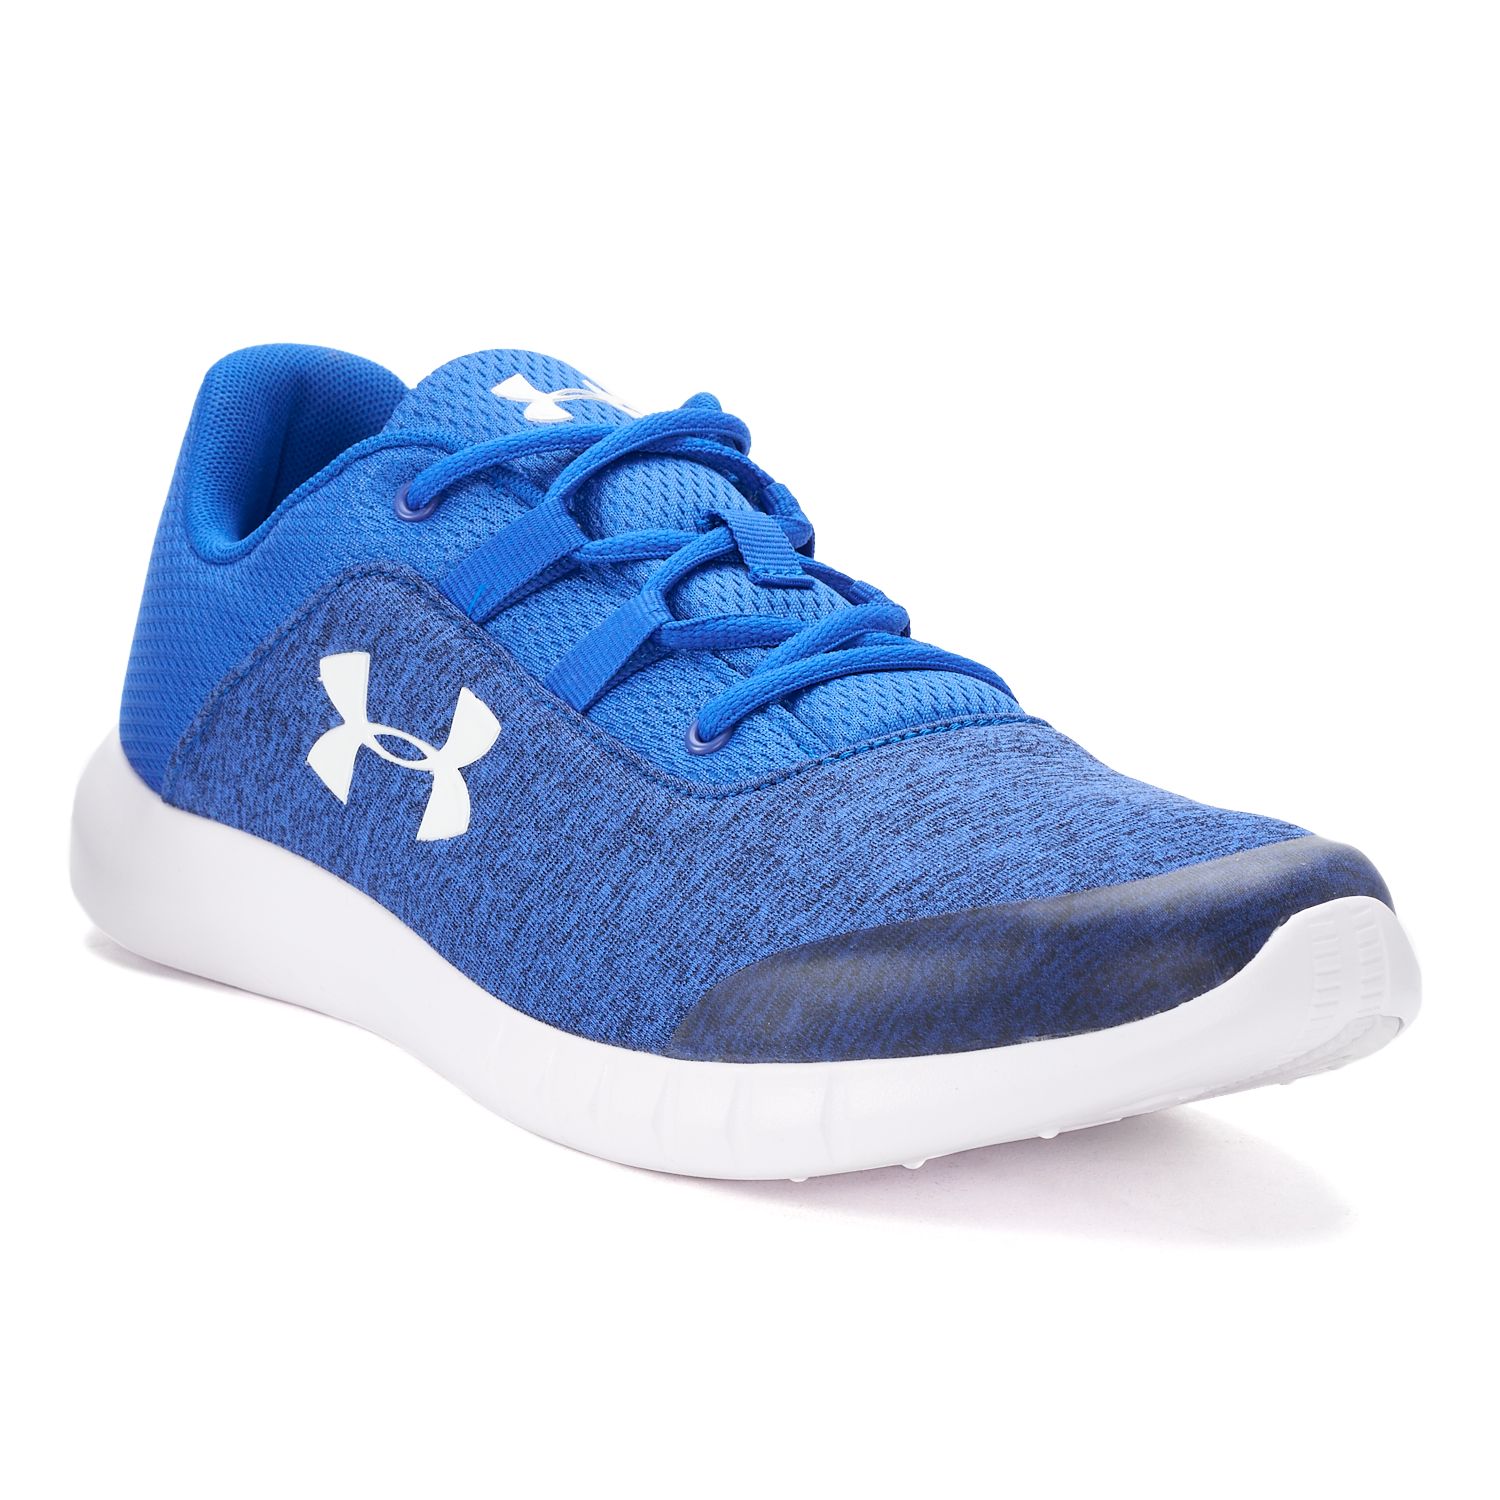 under armour men's mojo running shoes